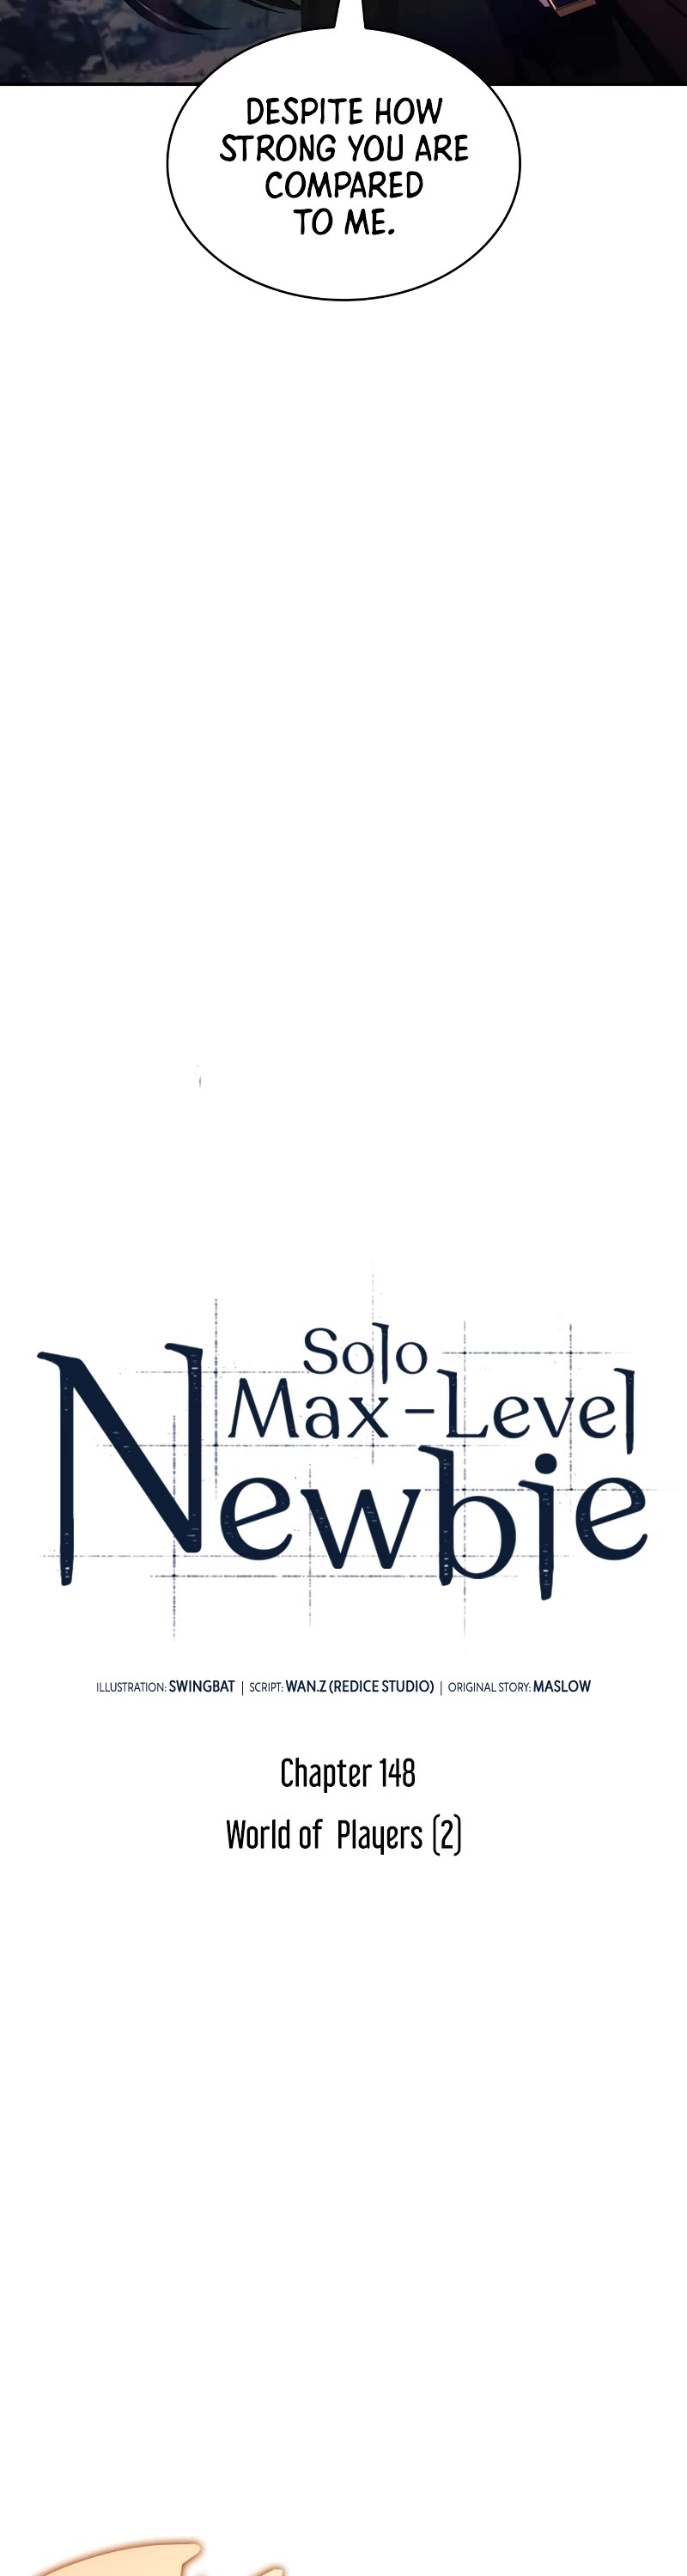 Solo Max Level Newbie, Chapter 148 World Of Players (2) image 24